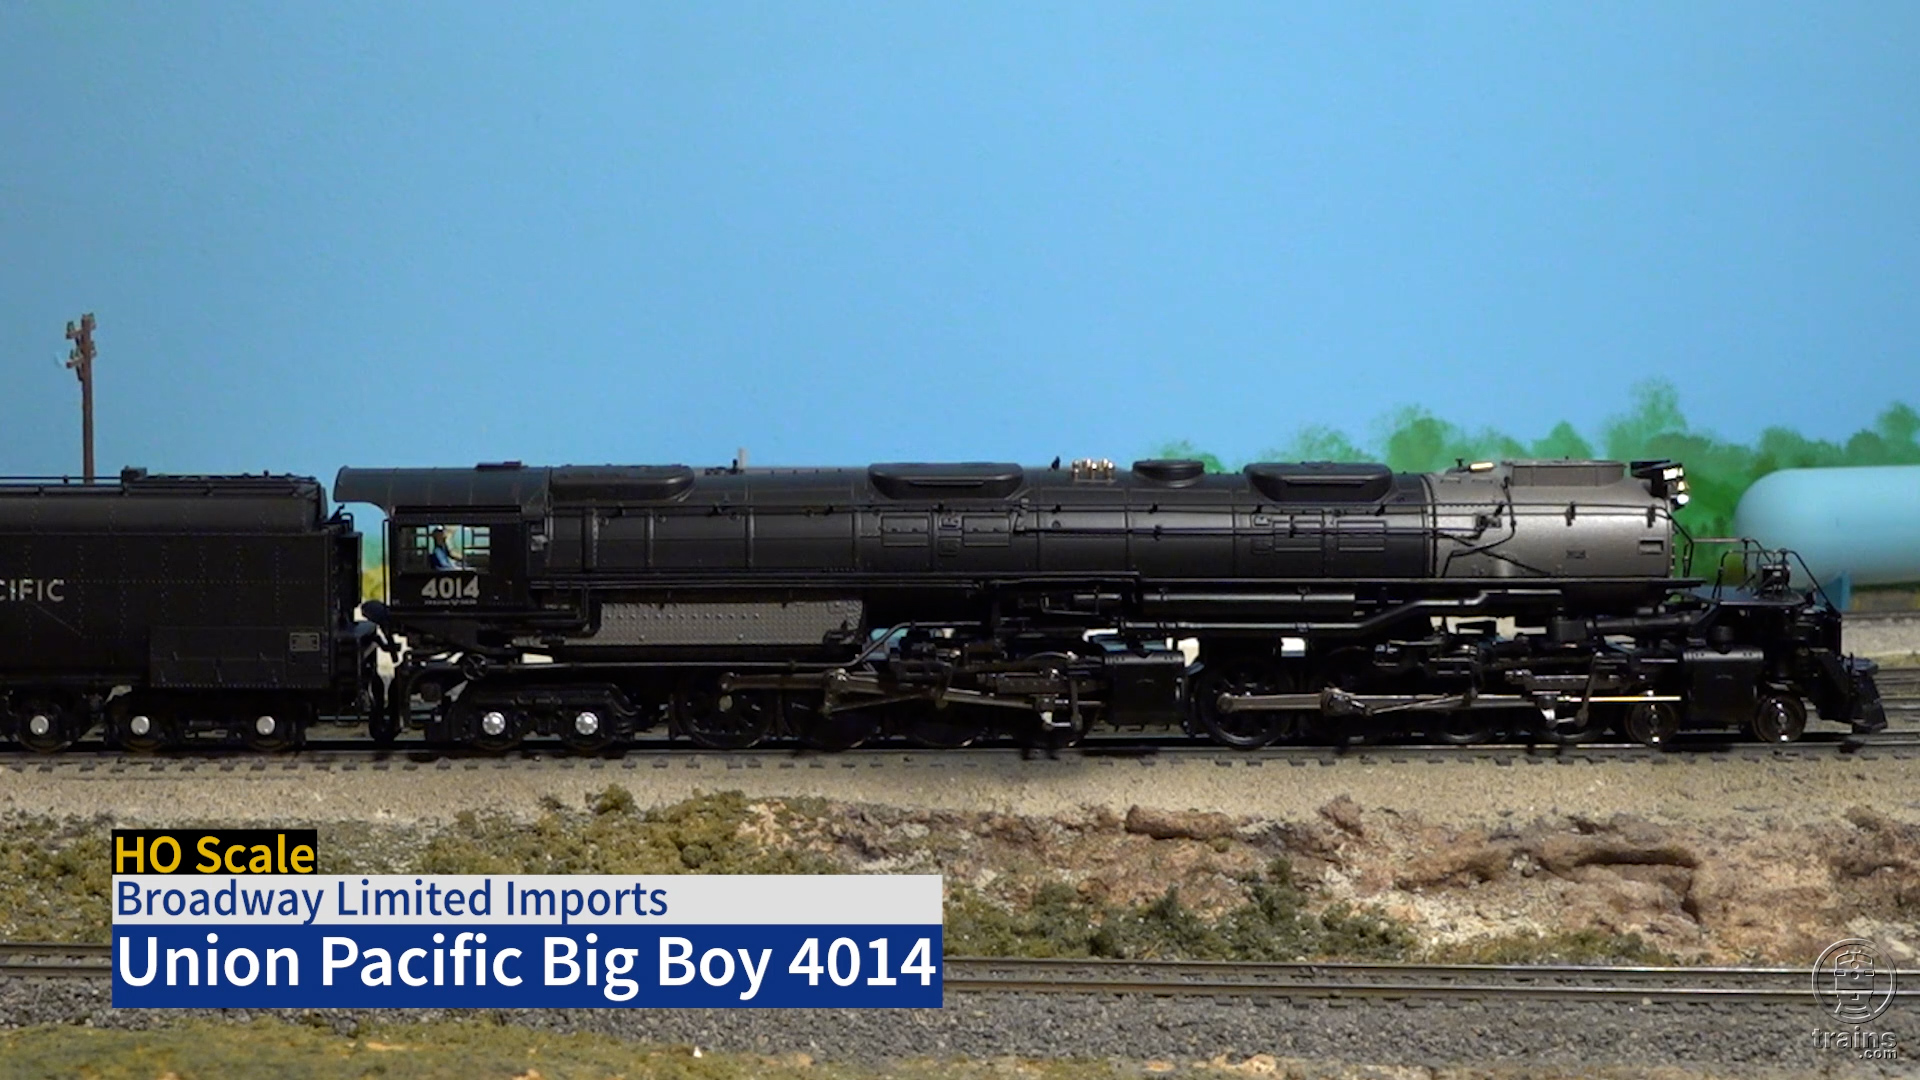 Union Pacific no. 4014 from Broadway Limited Imports